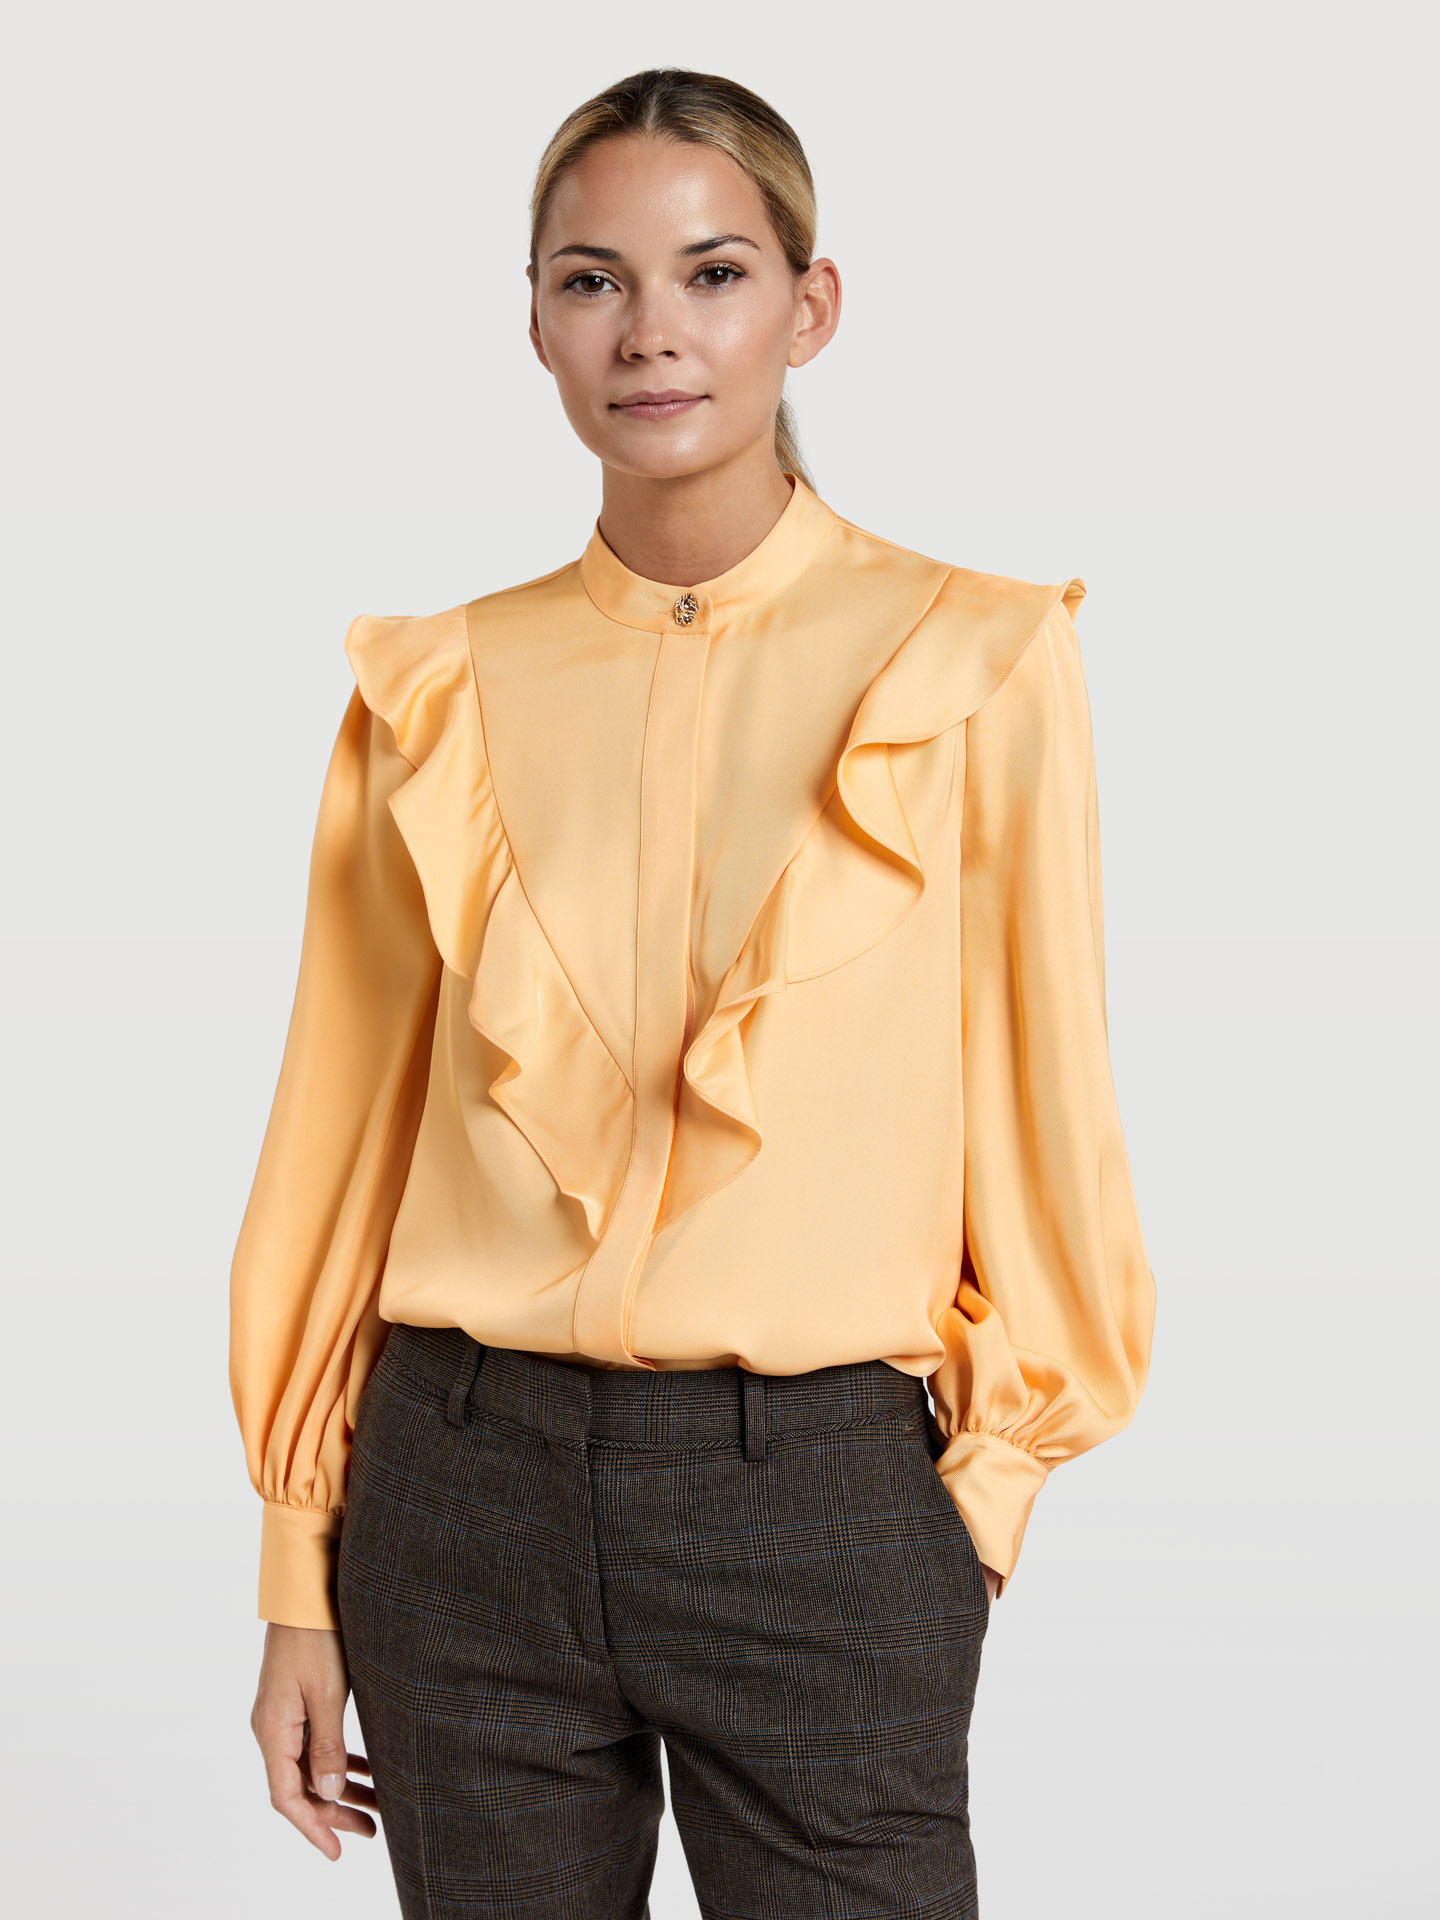 Blouse Light Yellow Casual Woman